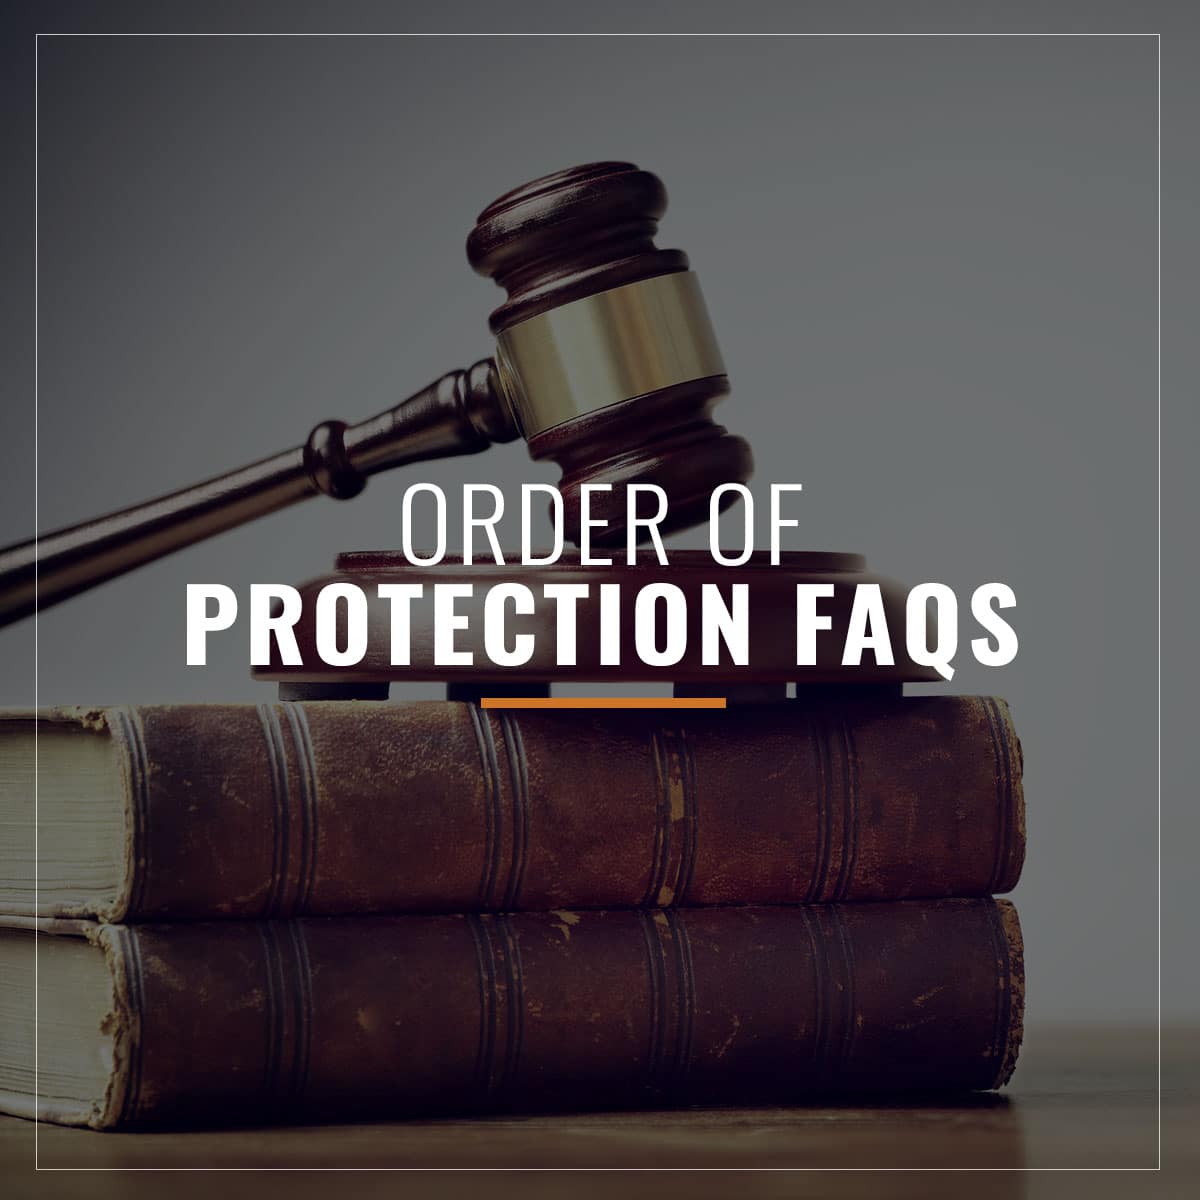 order of protection faqs